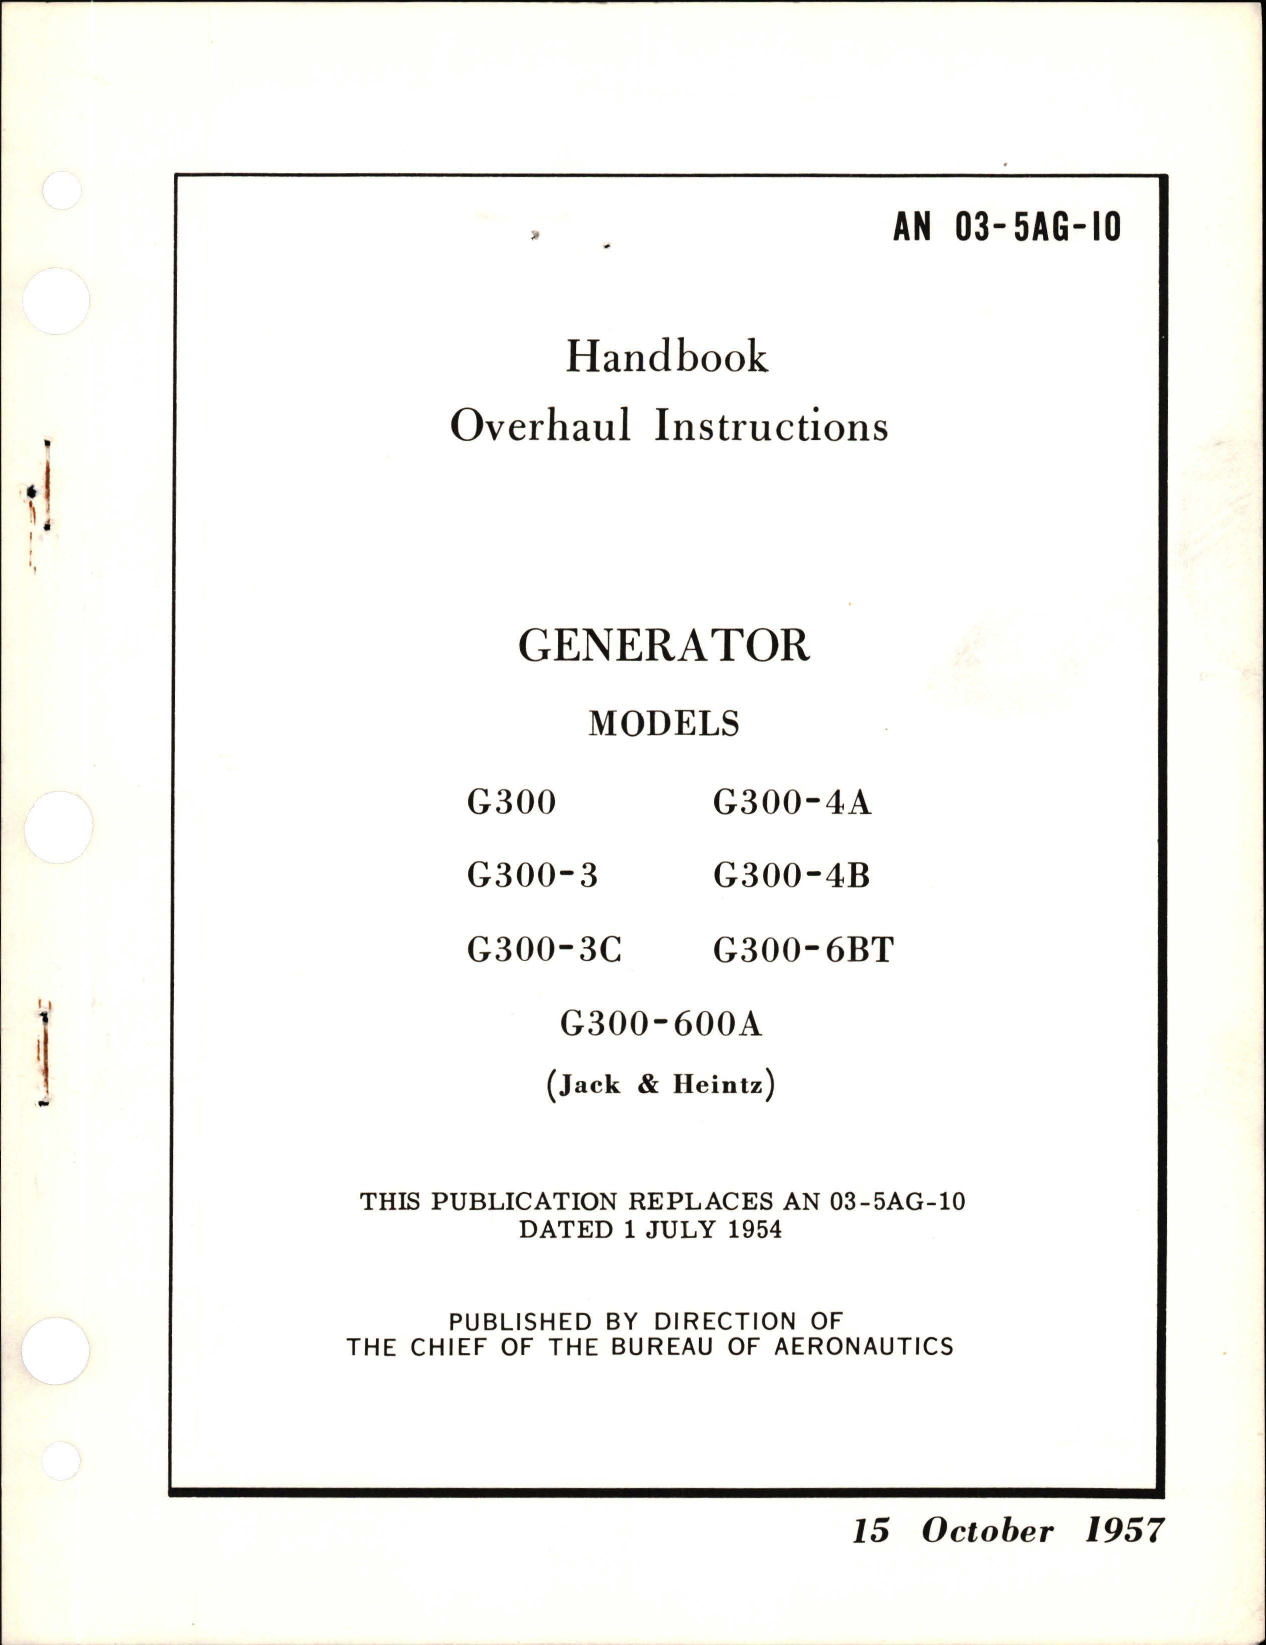 Sample page 1 from AirCorps Library document: Overhaul Instructions for Generator - Models G300, G300-3, G300-3C, G300-4A, G300-4B, G300-6BT, and G300-600A